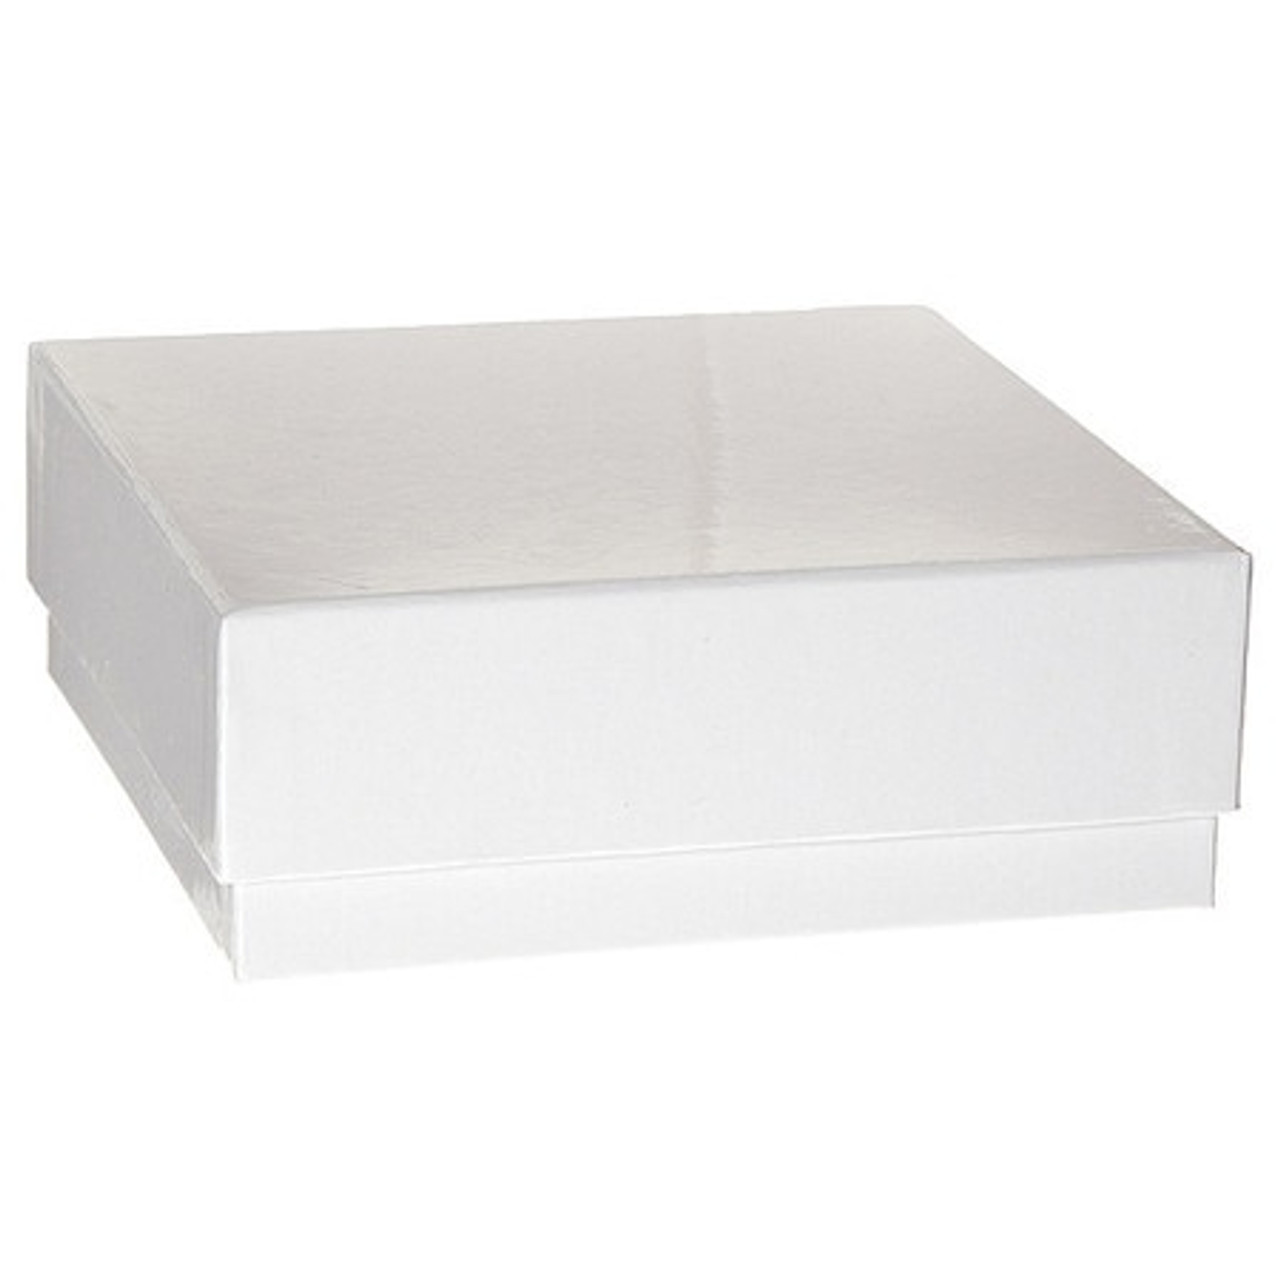 Cardboard Freezer Box, 3x3x2 inch with 25-Cell Divider